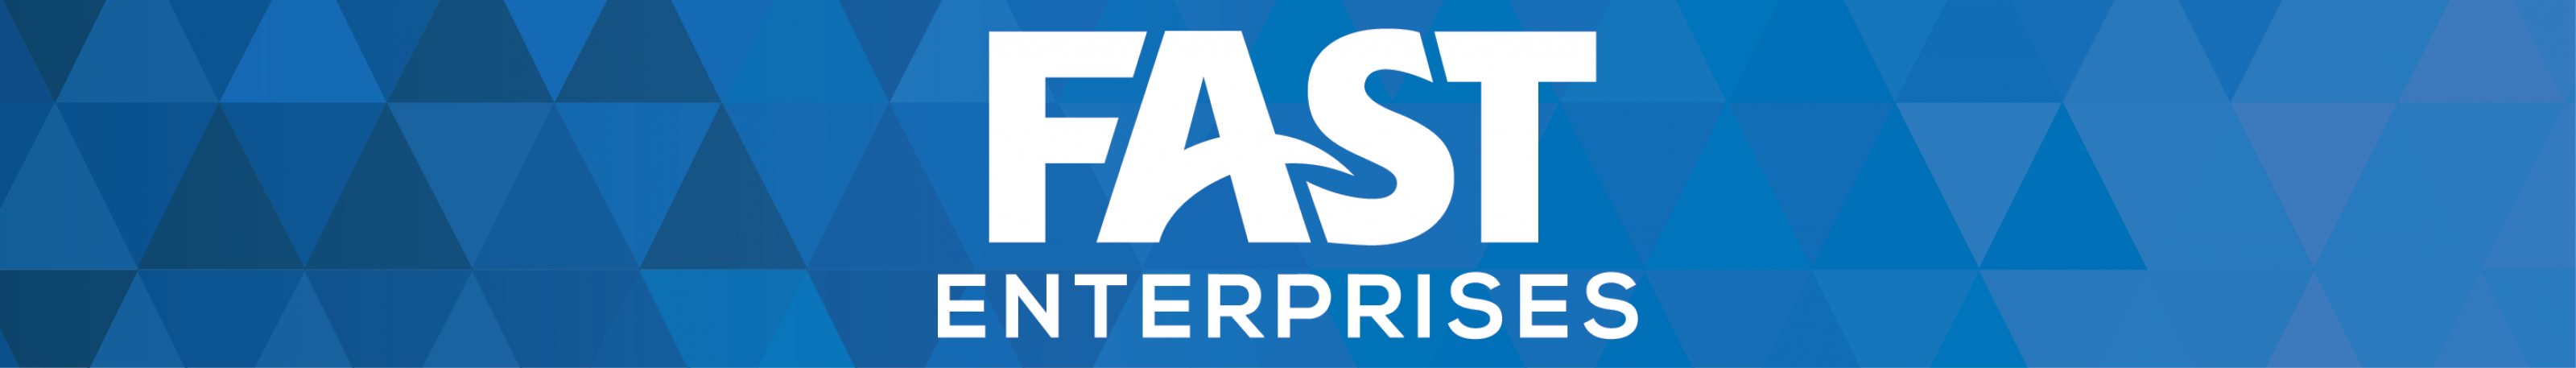 2021 WPF Sponsor Ad for FAST Enterprises - Blue Rectangle Gradient Blue Triangles fading from left, white text